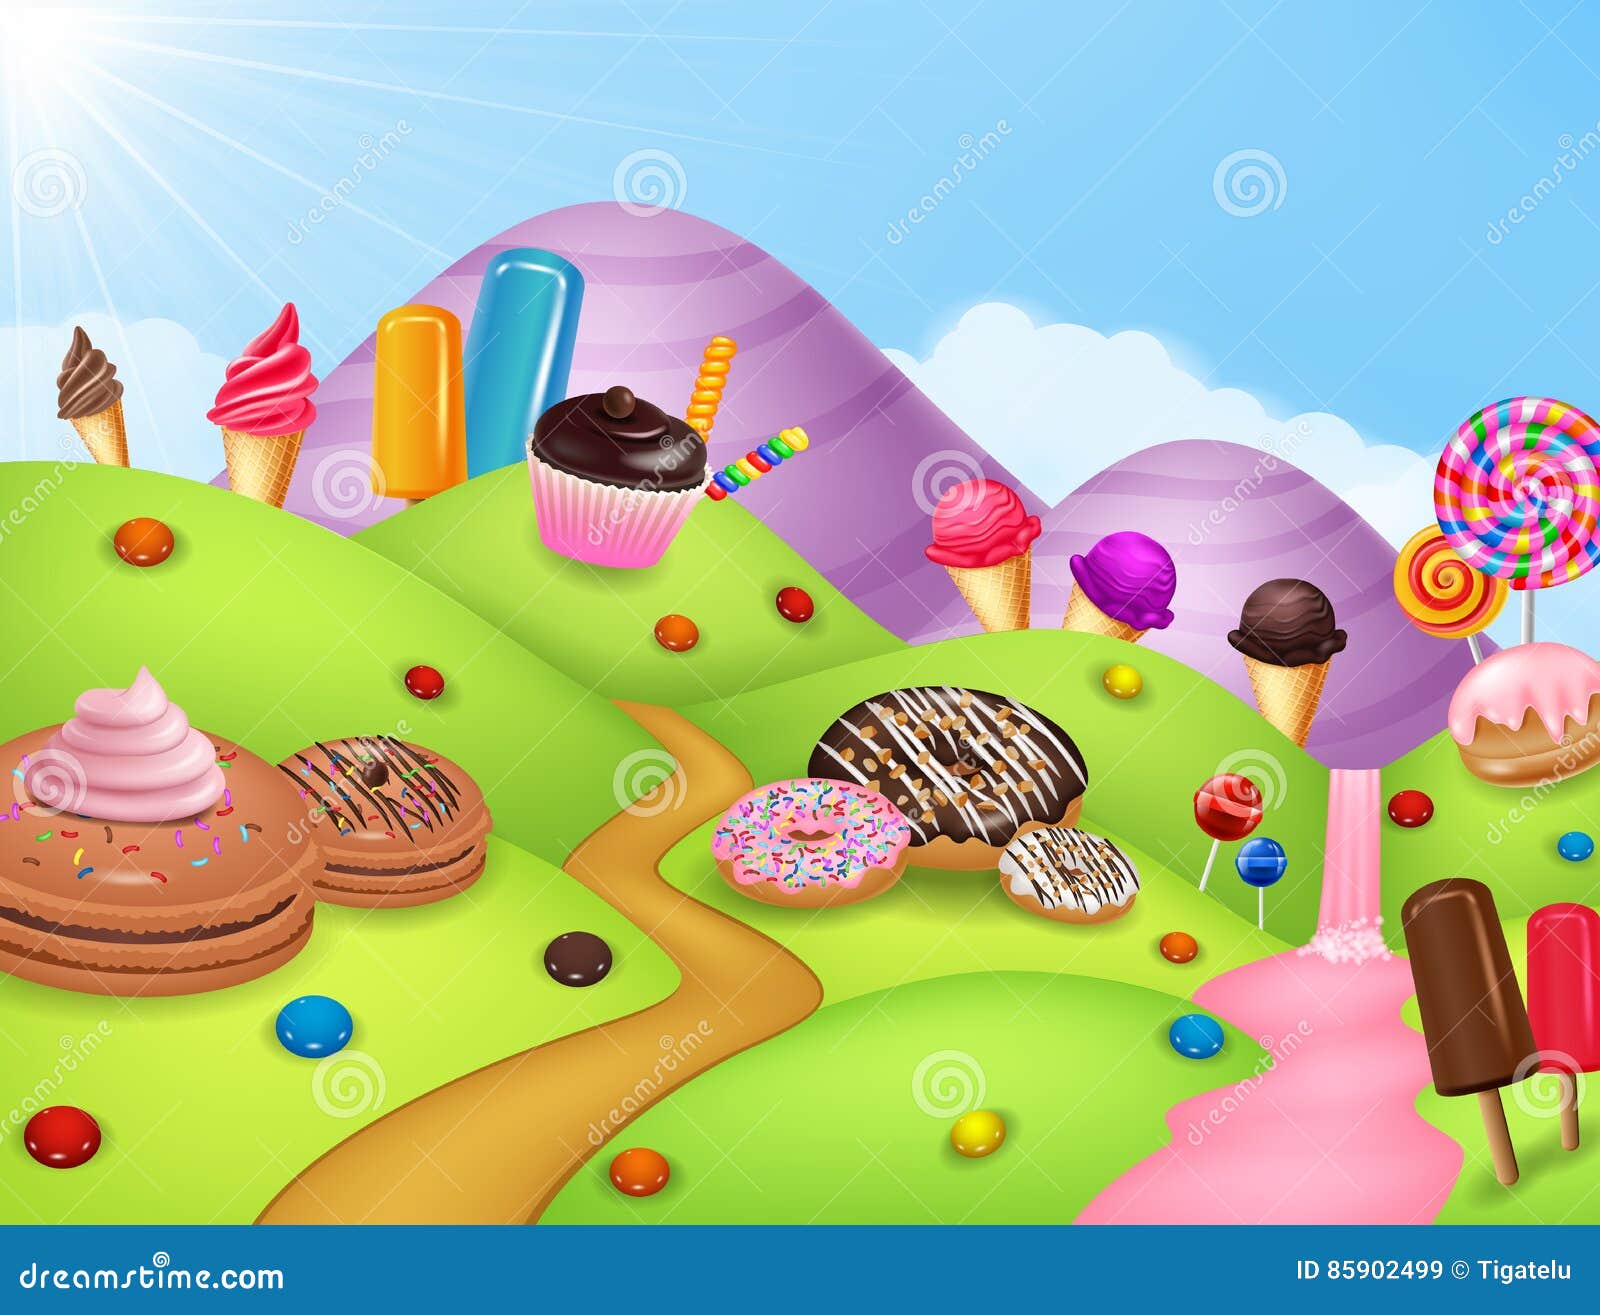 fantasy candyland with dessrts and sweets